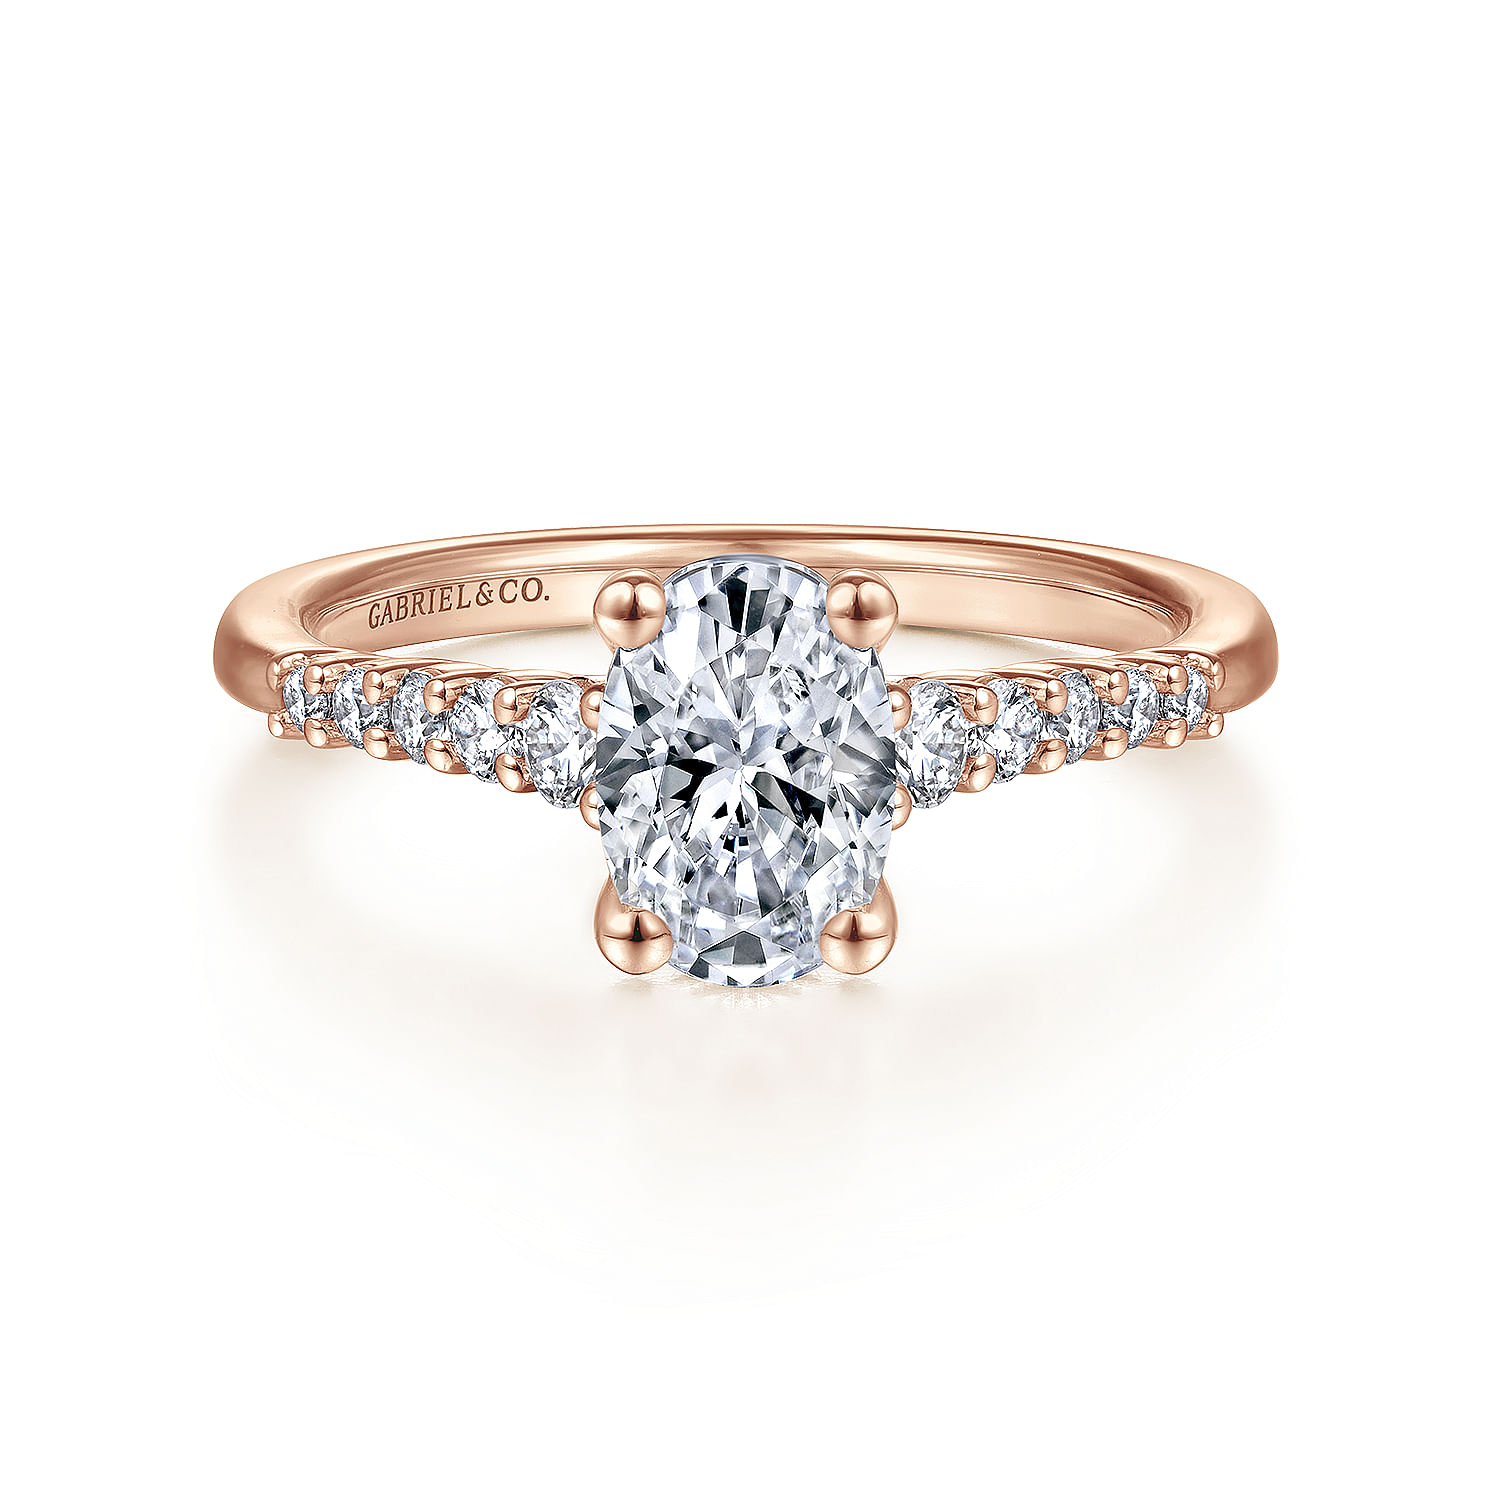 Reed---14K-Rose-Gold-Oval-Diamond-Engagement-Ring1